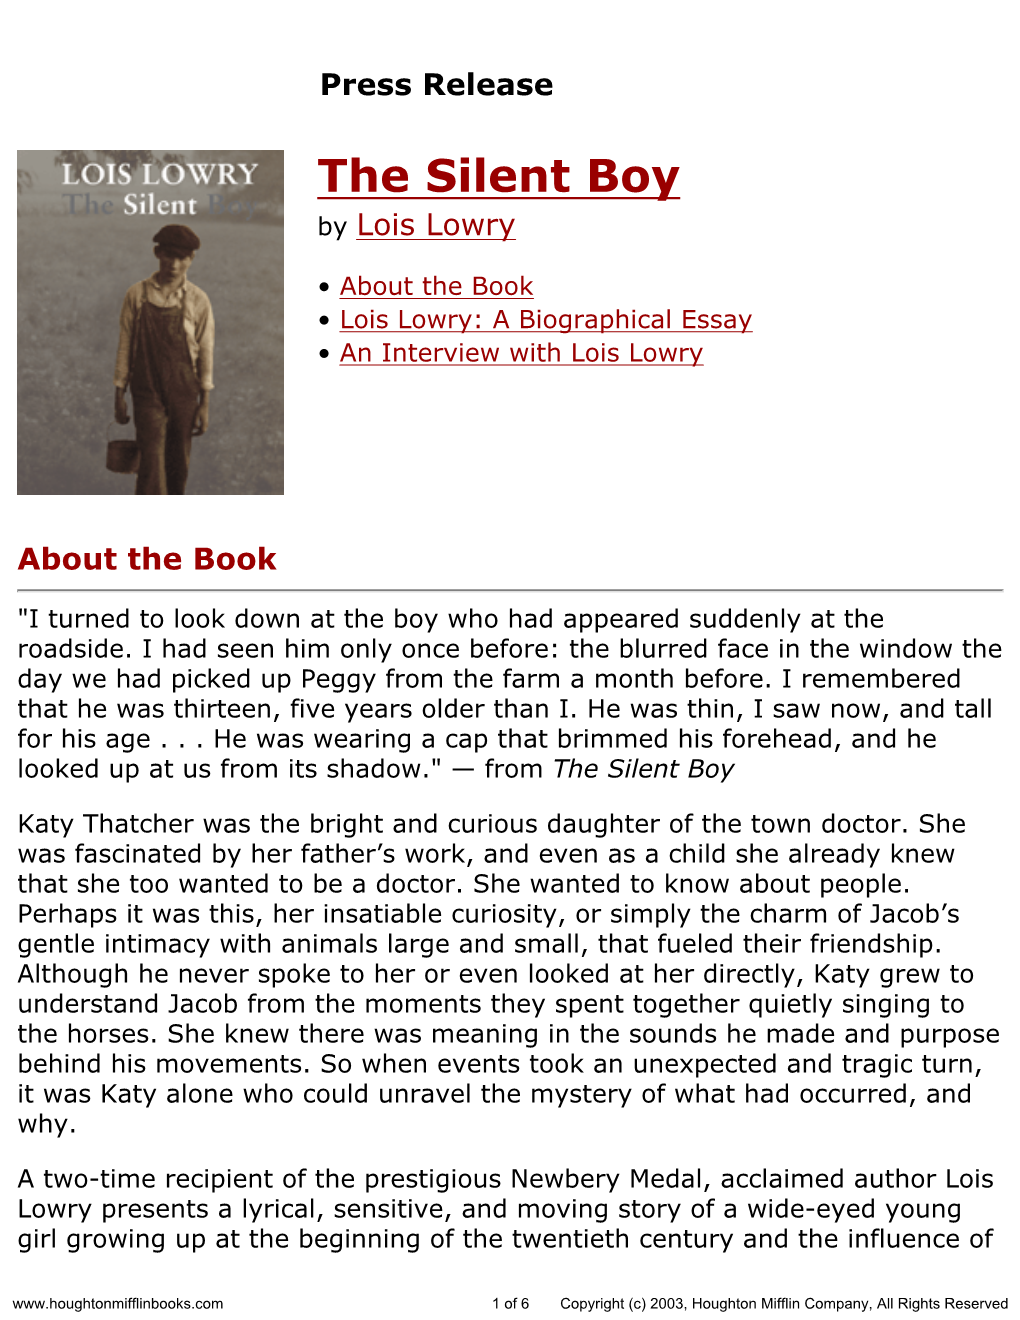 Press Release for the Silent Boy Published by Houghton Mifflin